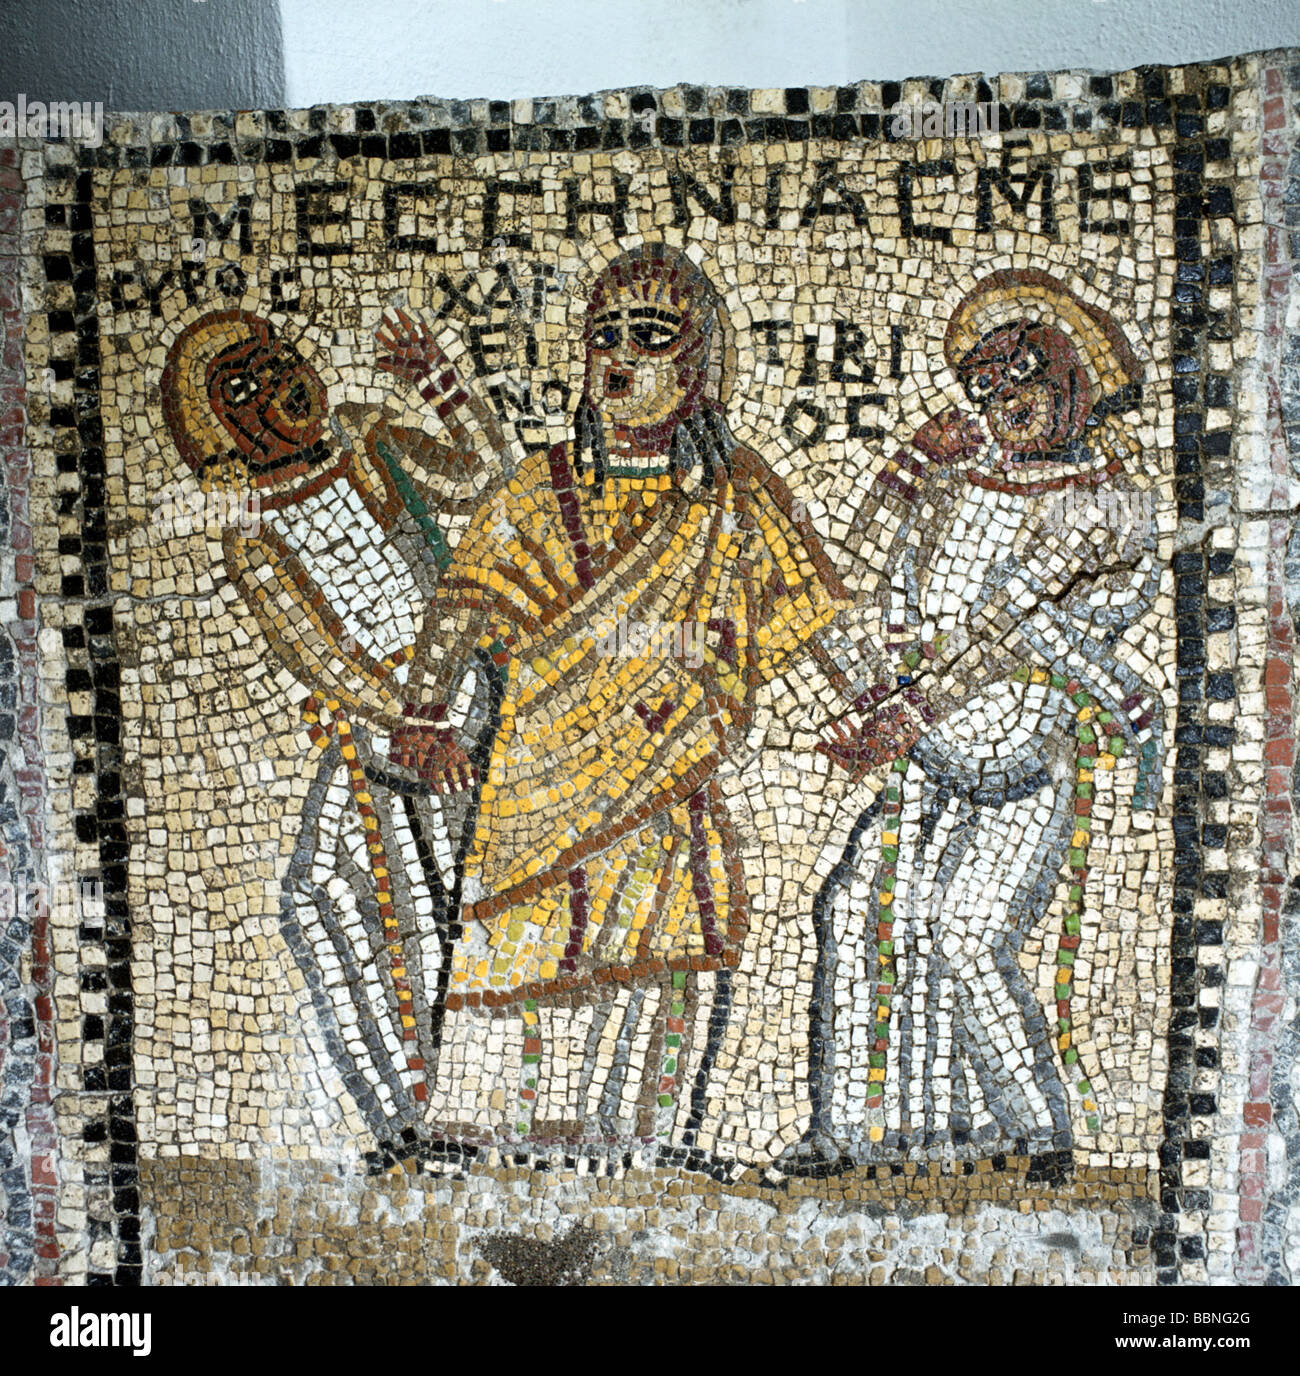 theatre / theater, ancient world, Greece, scene of a comedy by Menander (342 BC - 291 BC), mosaic, Lesbos, historic, historical, masks, mask, actor, actors, ancient world, people, Stock Photo